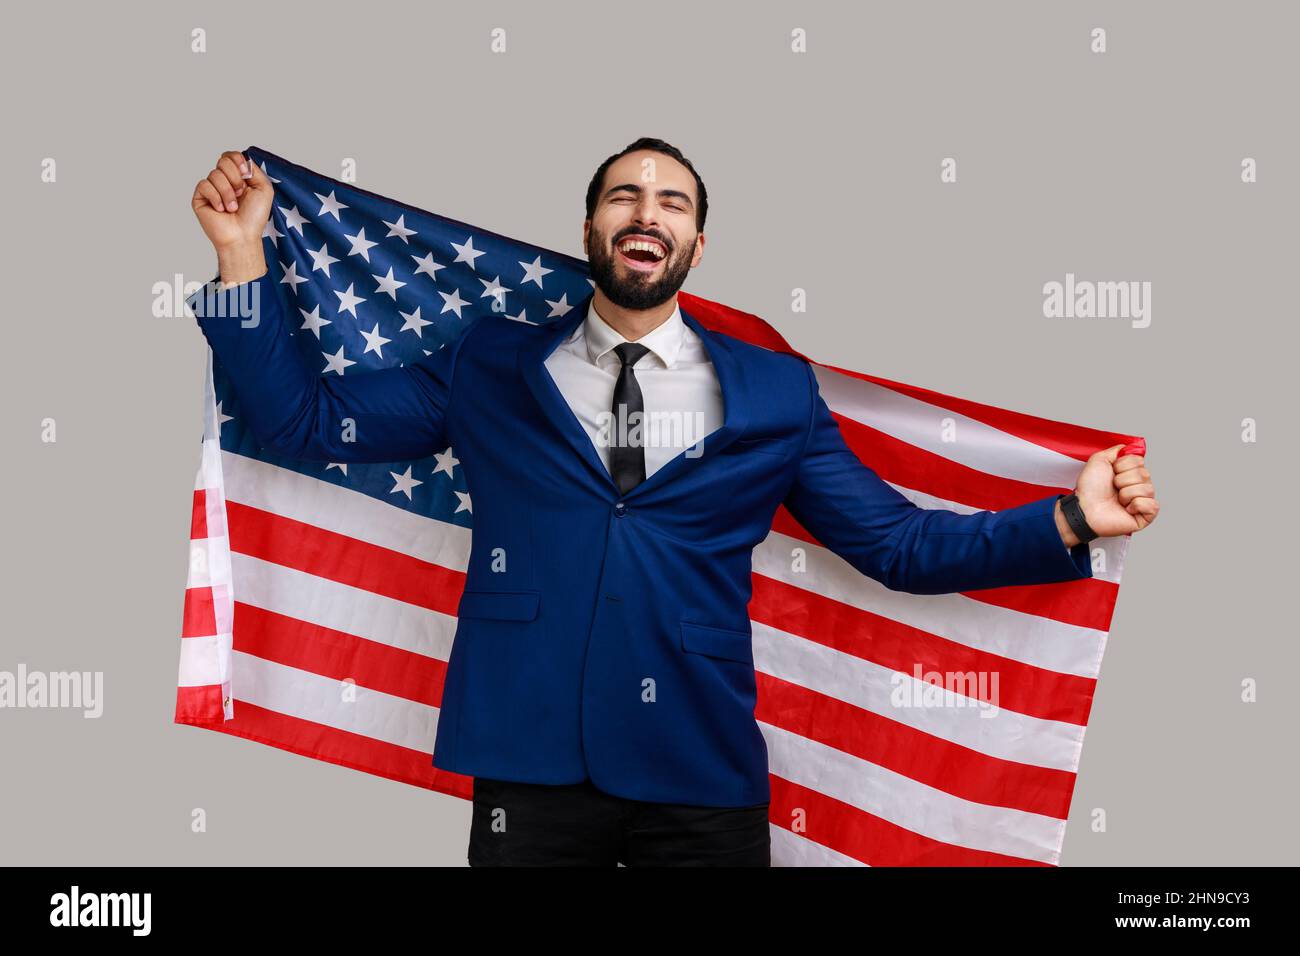 Excited bearded man holding USA flag and looking at camera with rejoice look, celebrating national holiday, wearing official style suit. Indoor studio shot isolated on gray background. Stock Photo